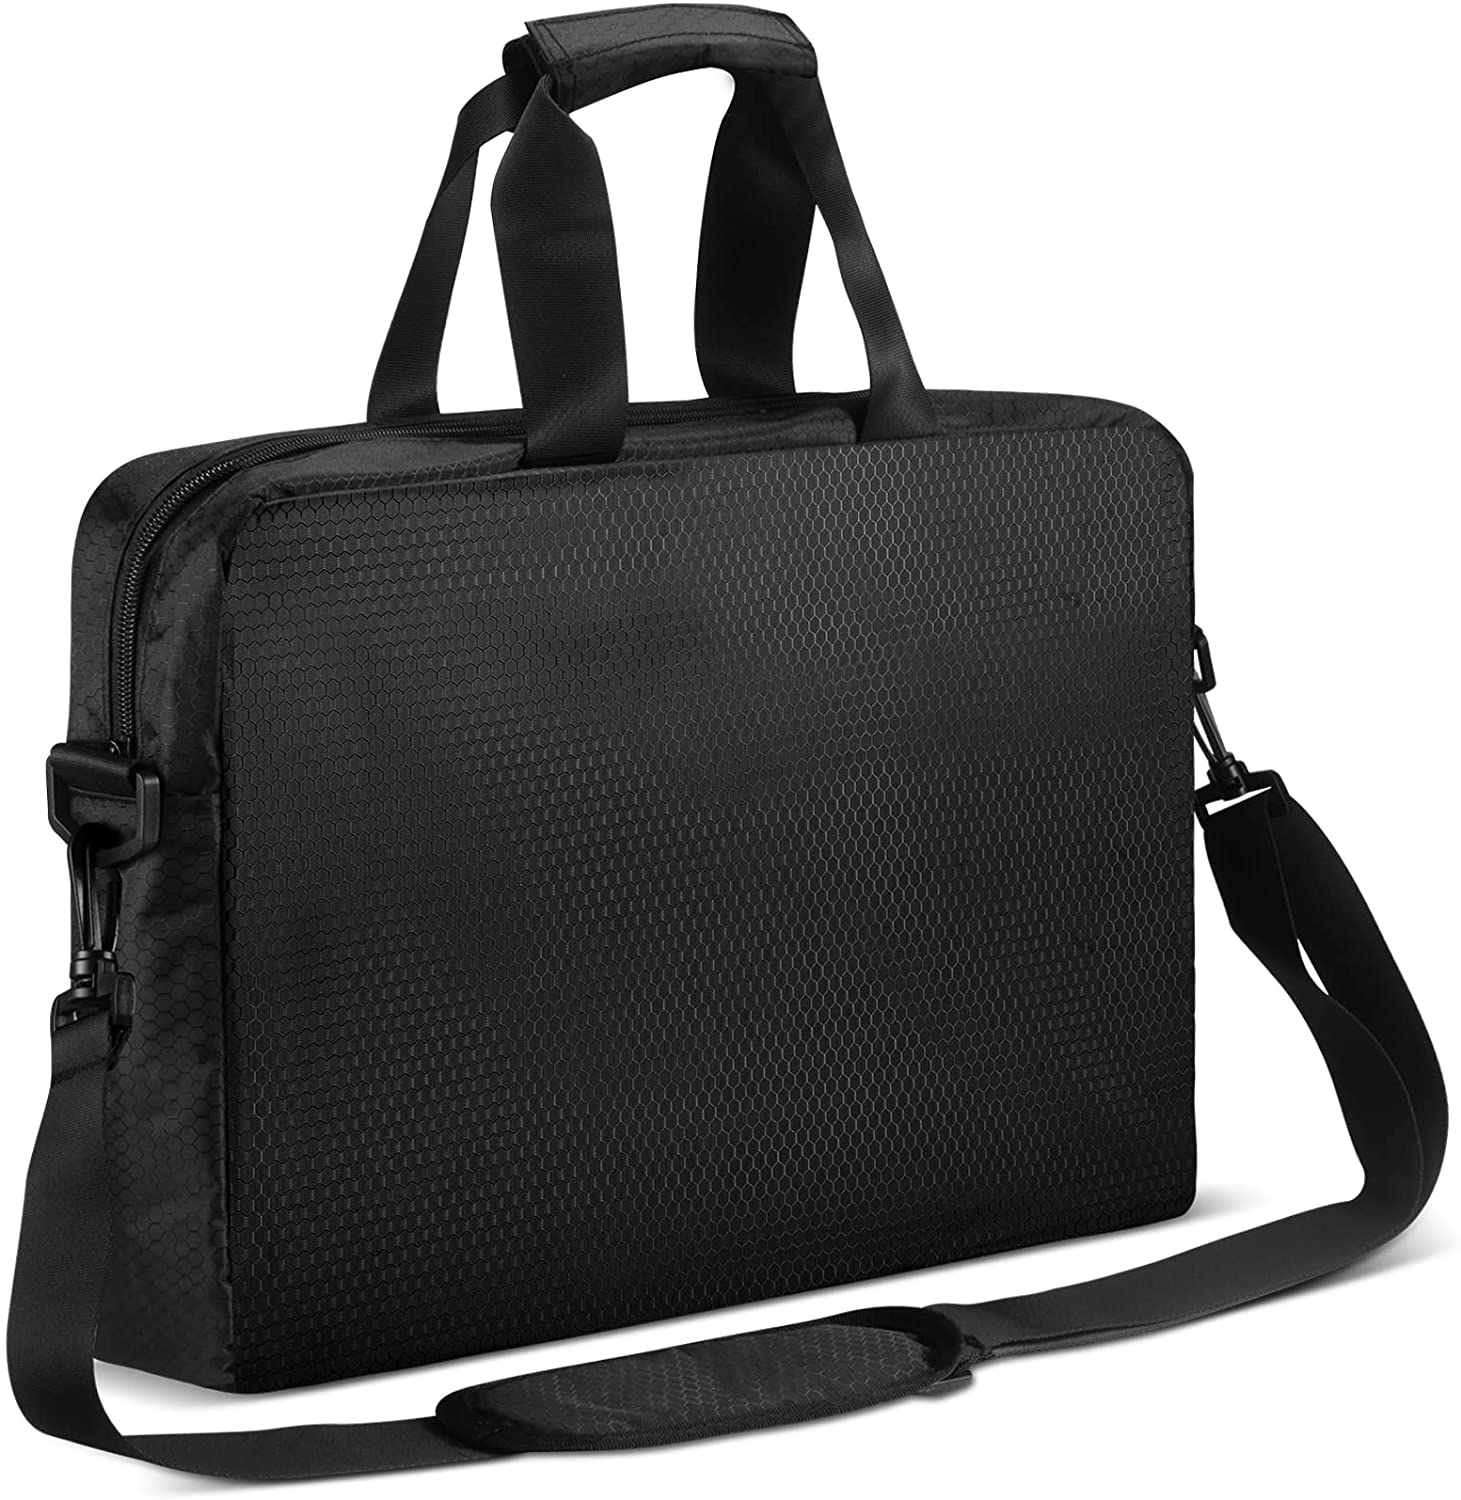 Laptop Bag 17.3 Inch Briefcase Business Travel